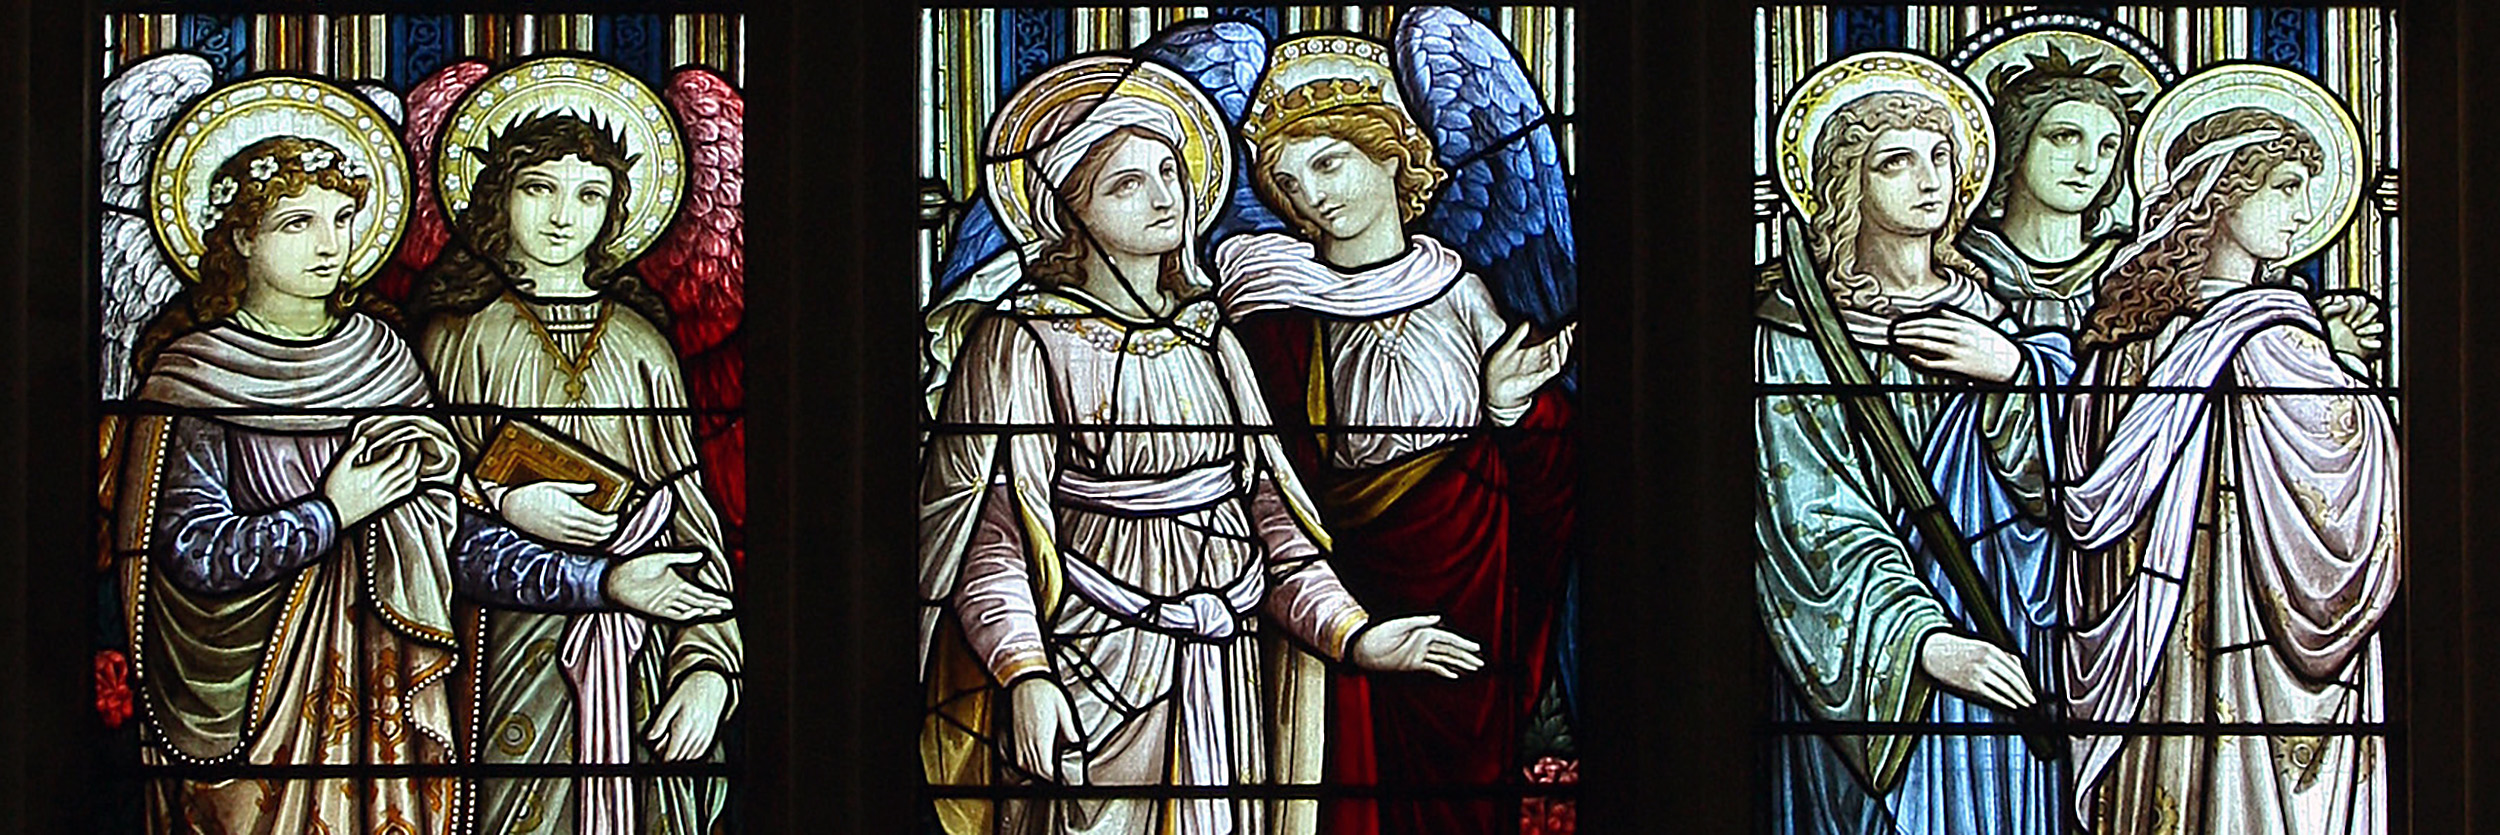 Michael & All Angels Booton north nave stained glss angels